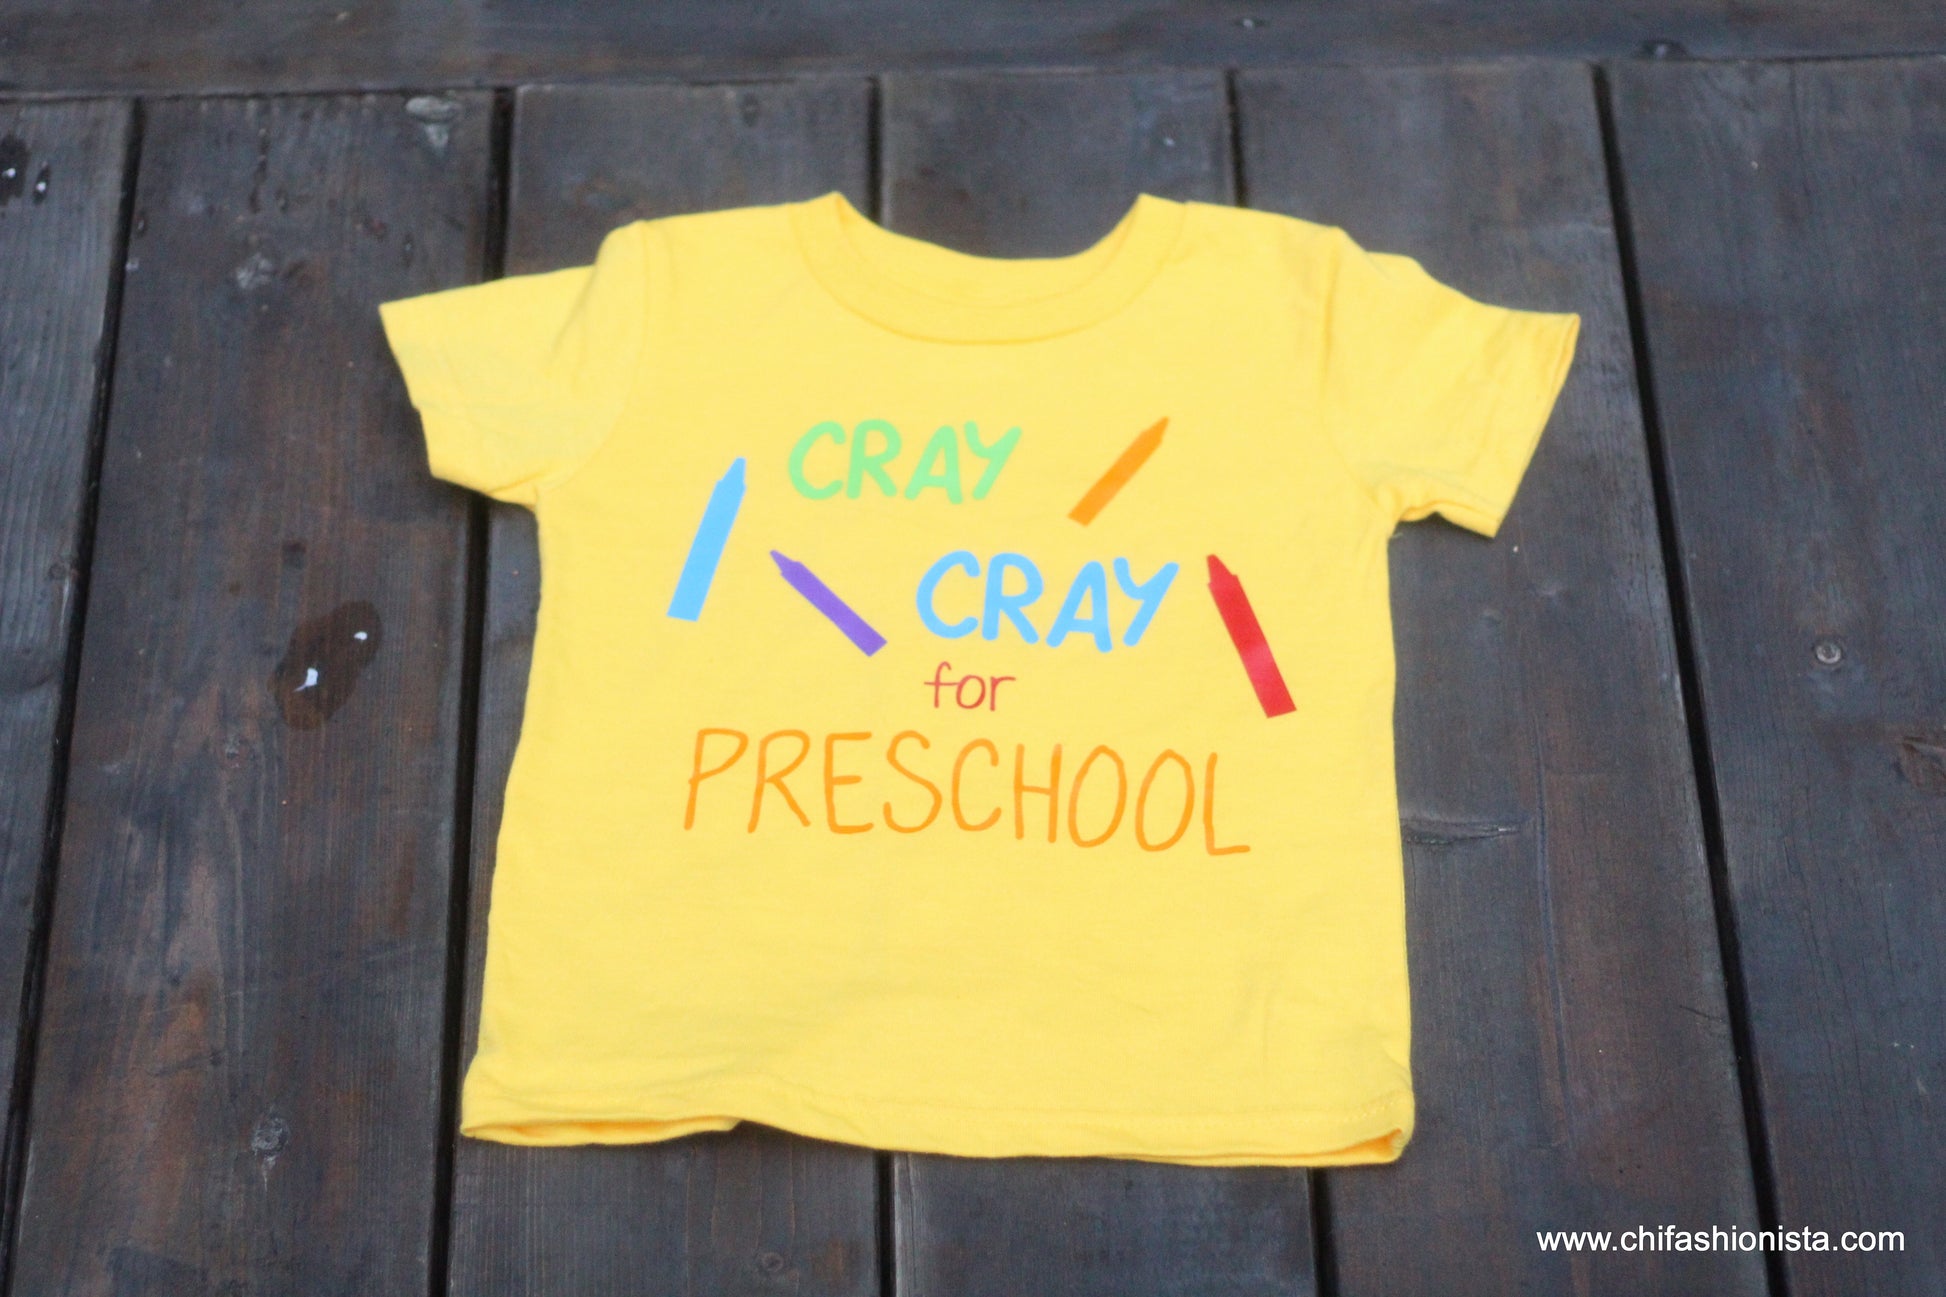 Handcrafted Children's Clothing, Clothing for Children and Parents, Cray Cray for Preschool, chi-fashionista